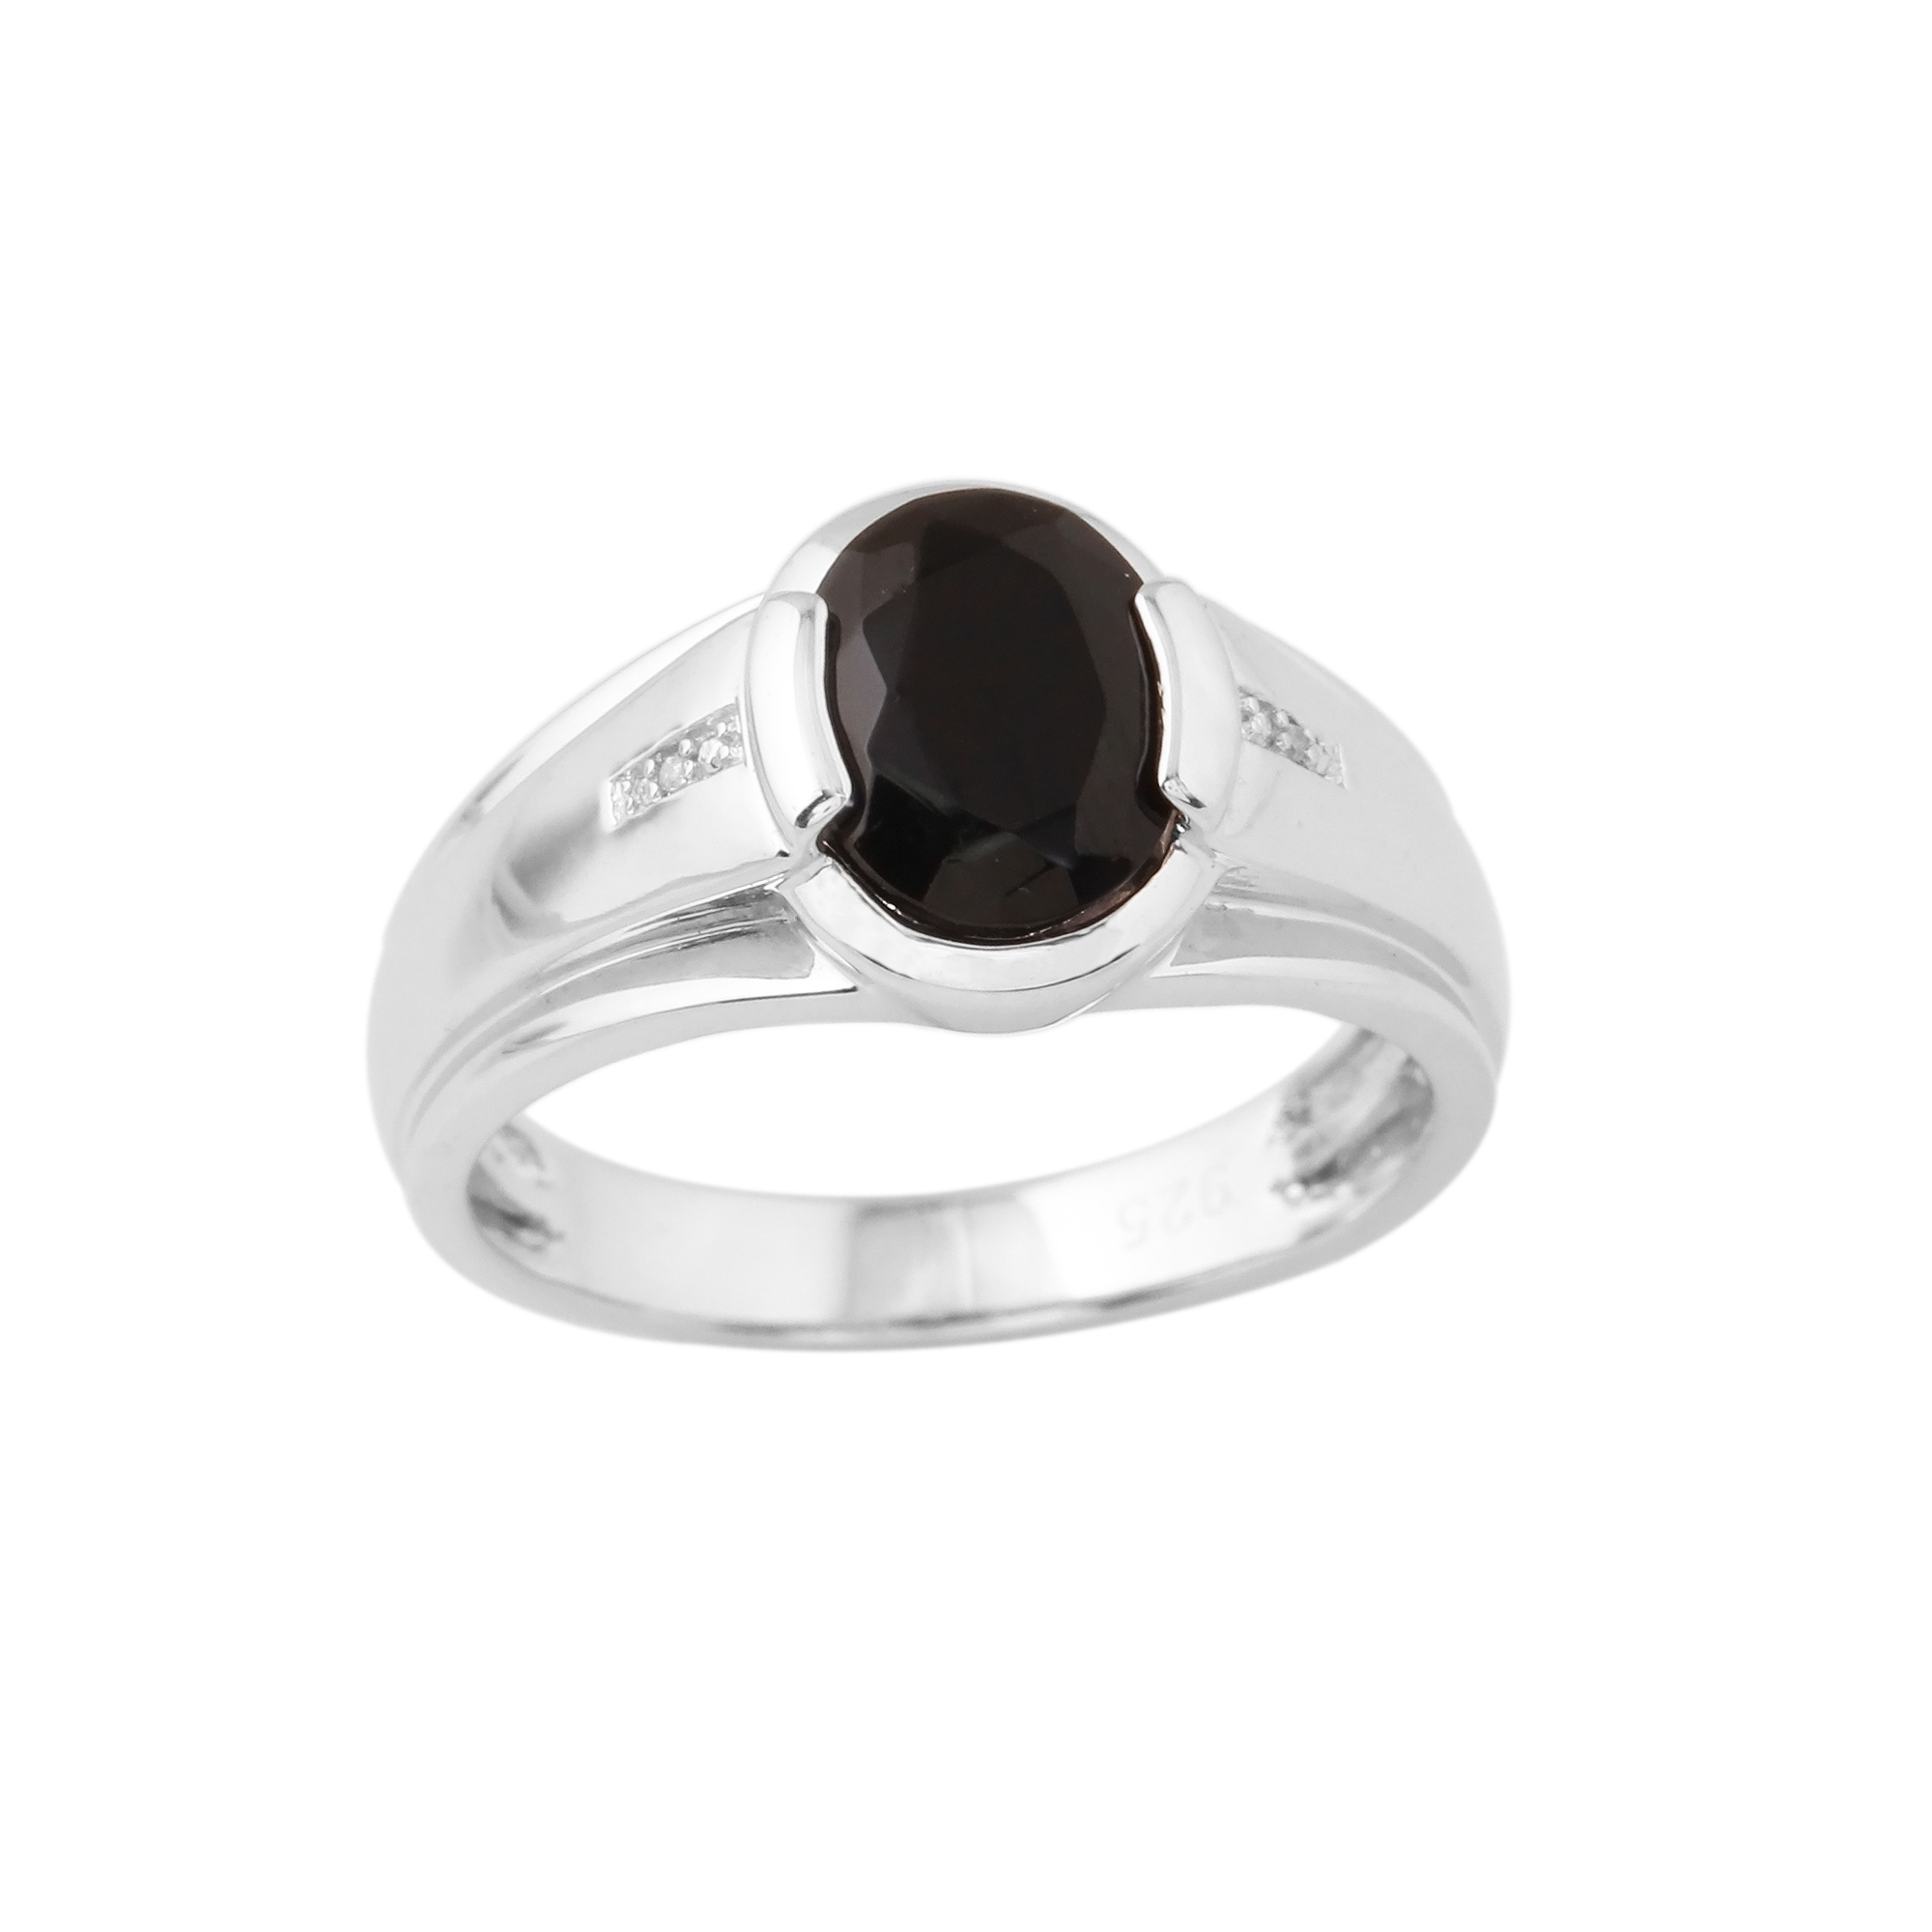 Men's Onyx Sterling Silver and Diamond Accent Ring